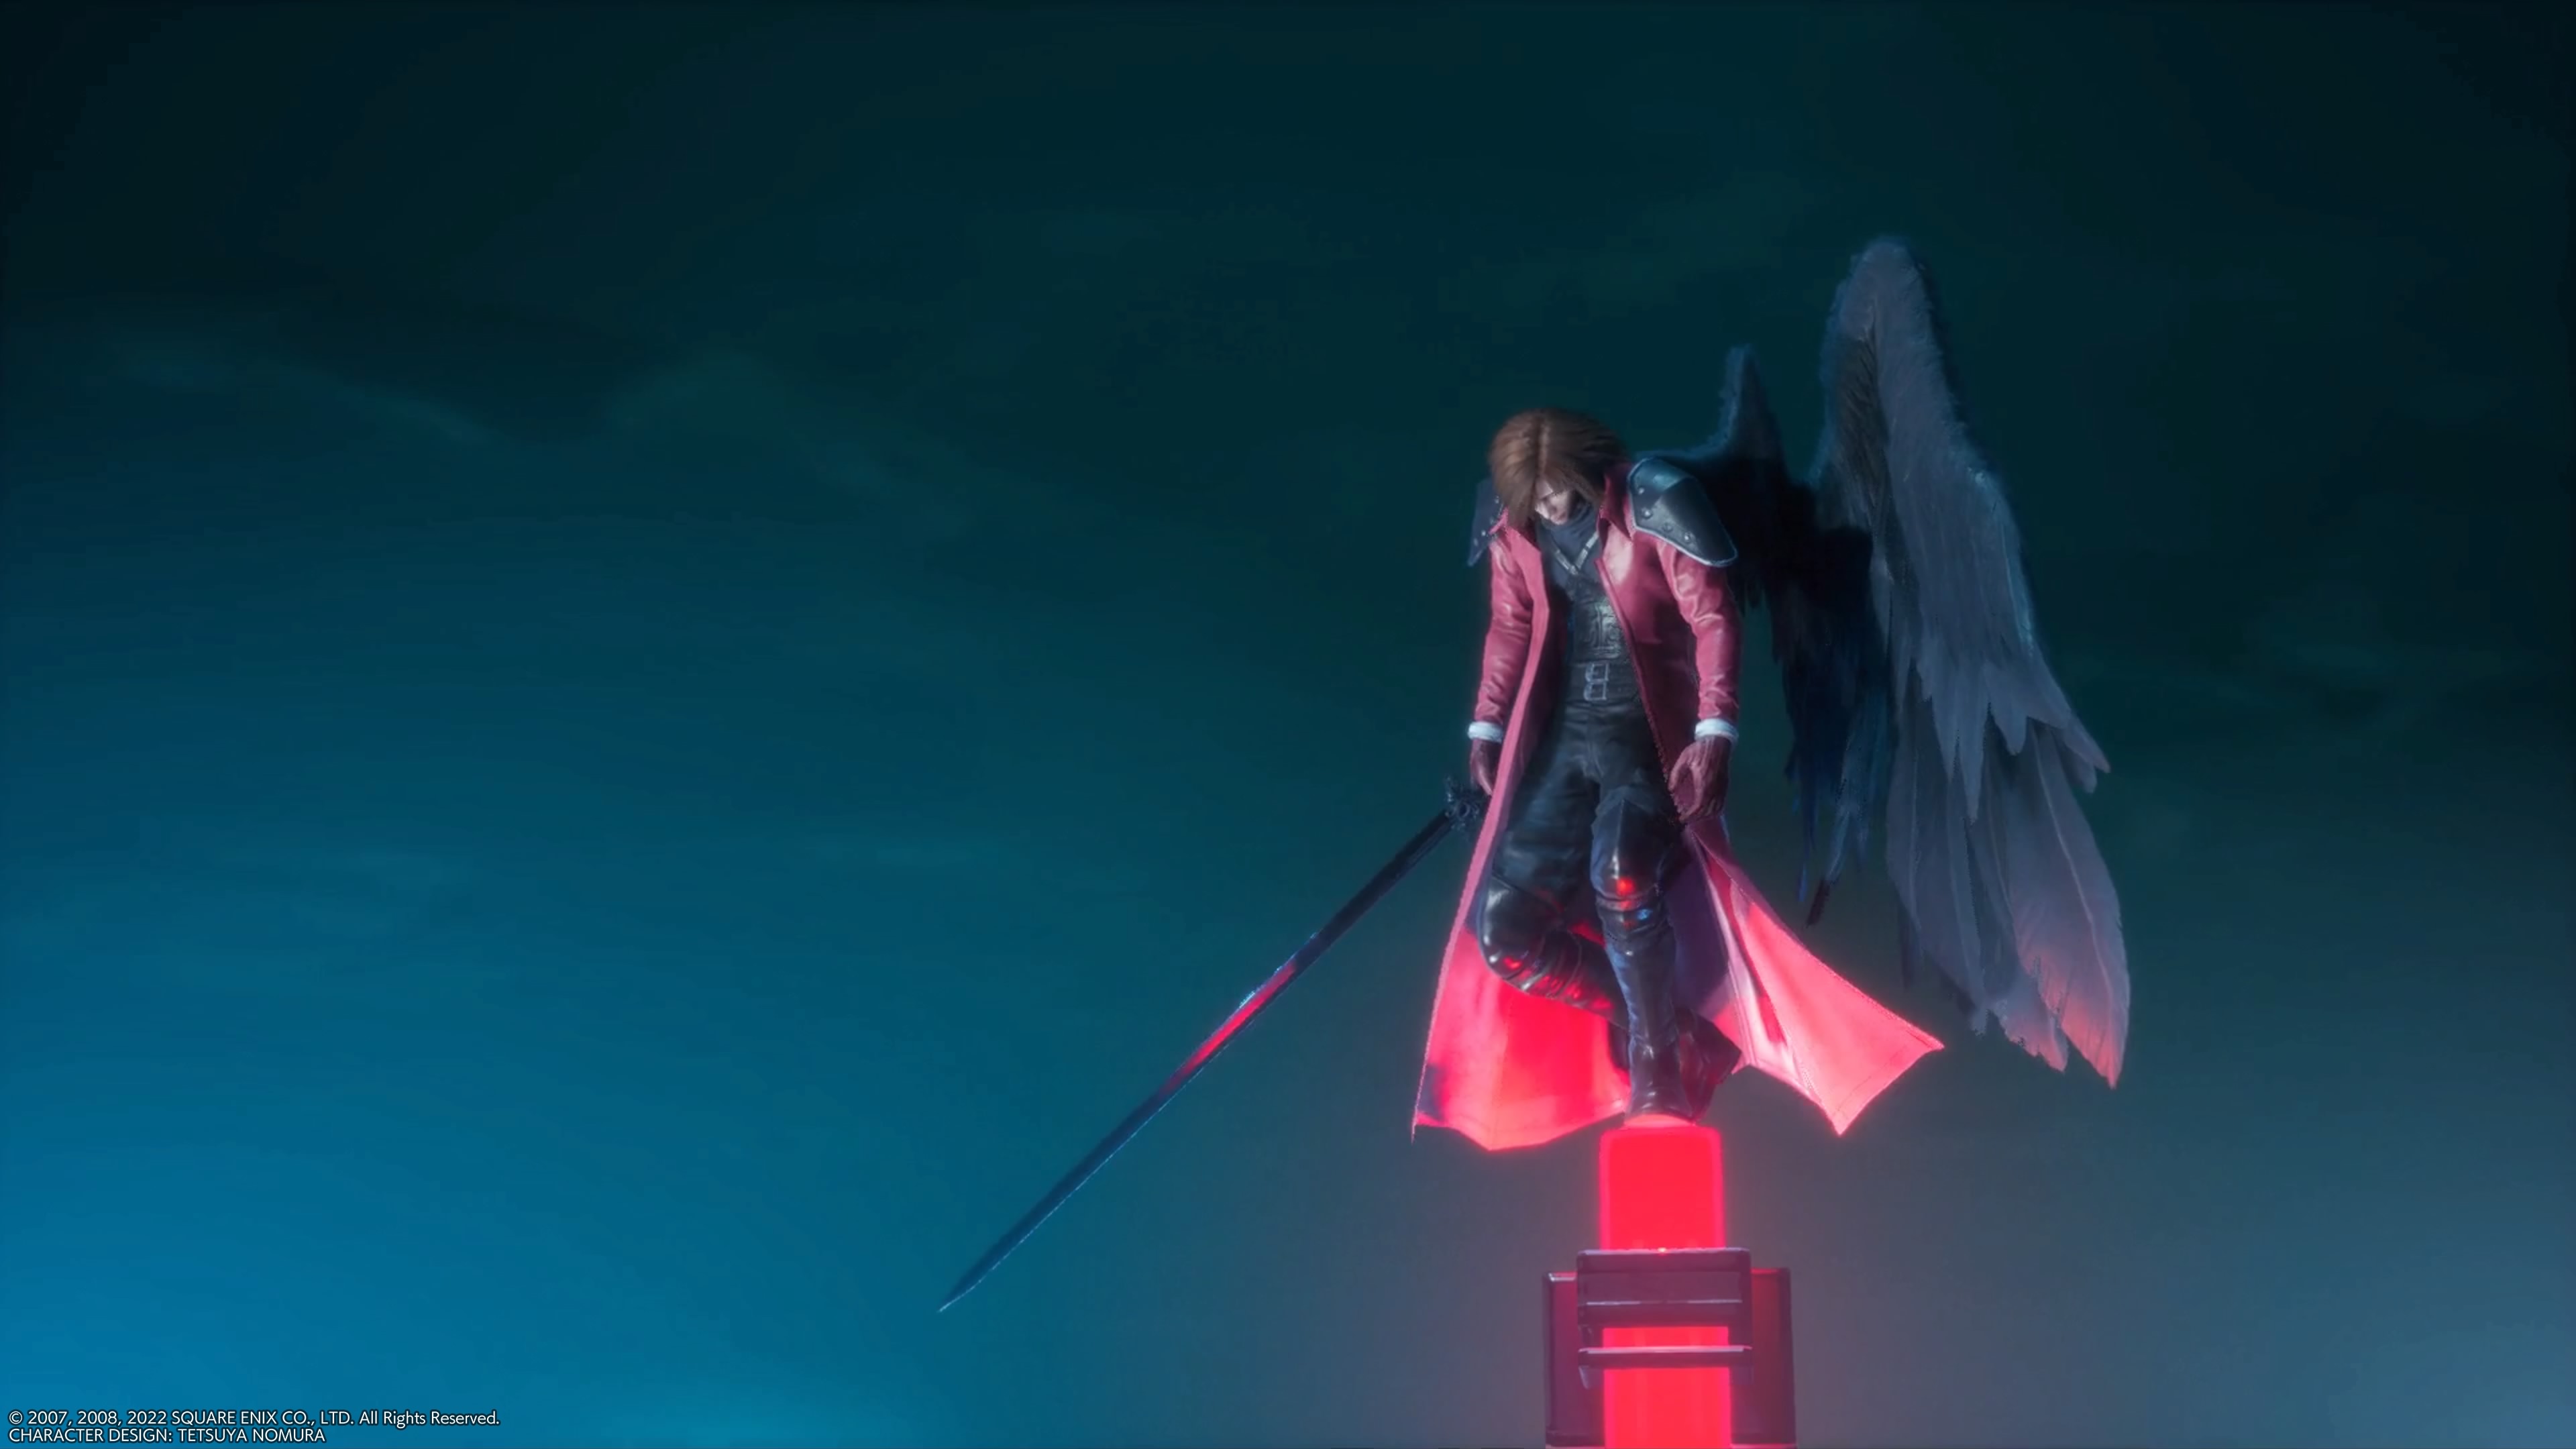 Final Fantasy VII Rebirth expands upon what made Remake great